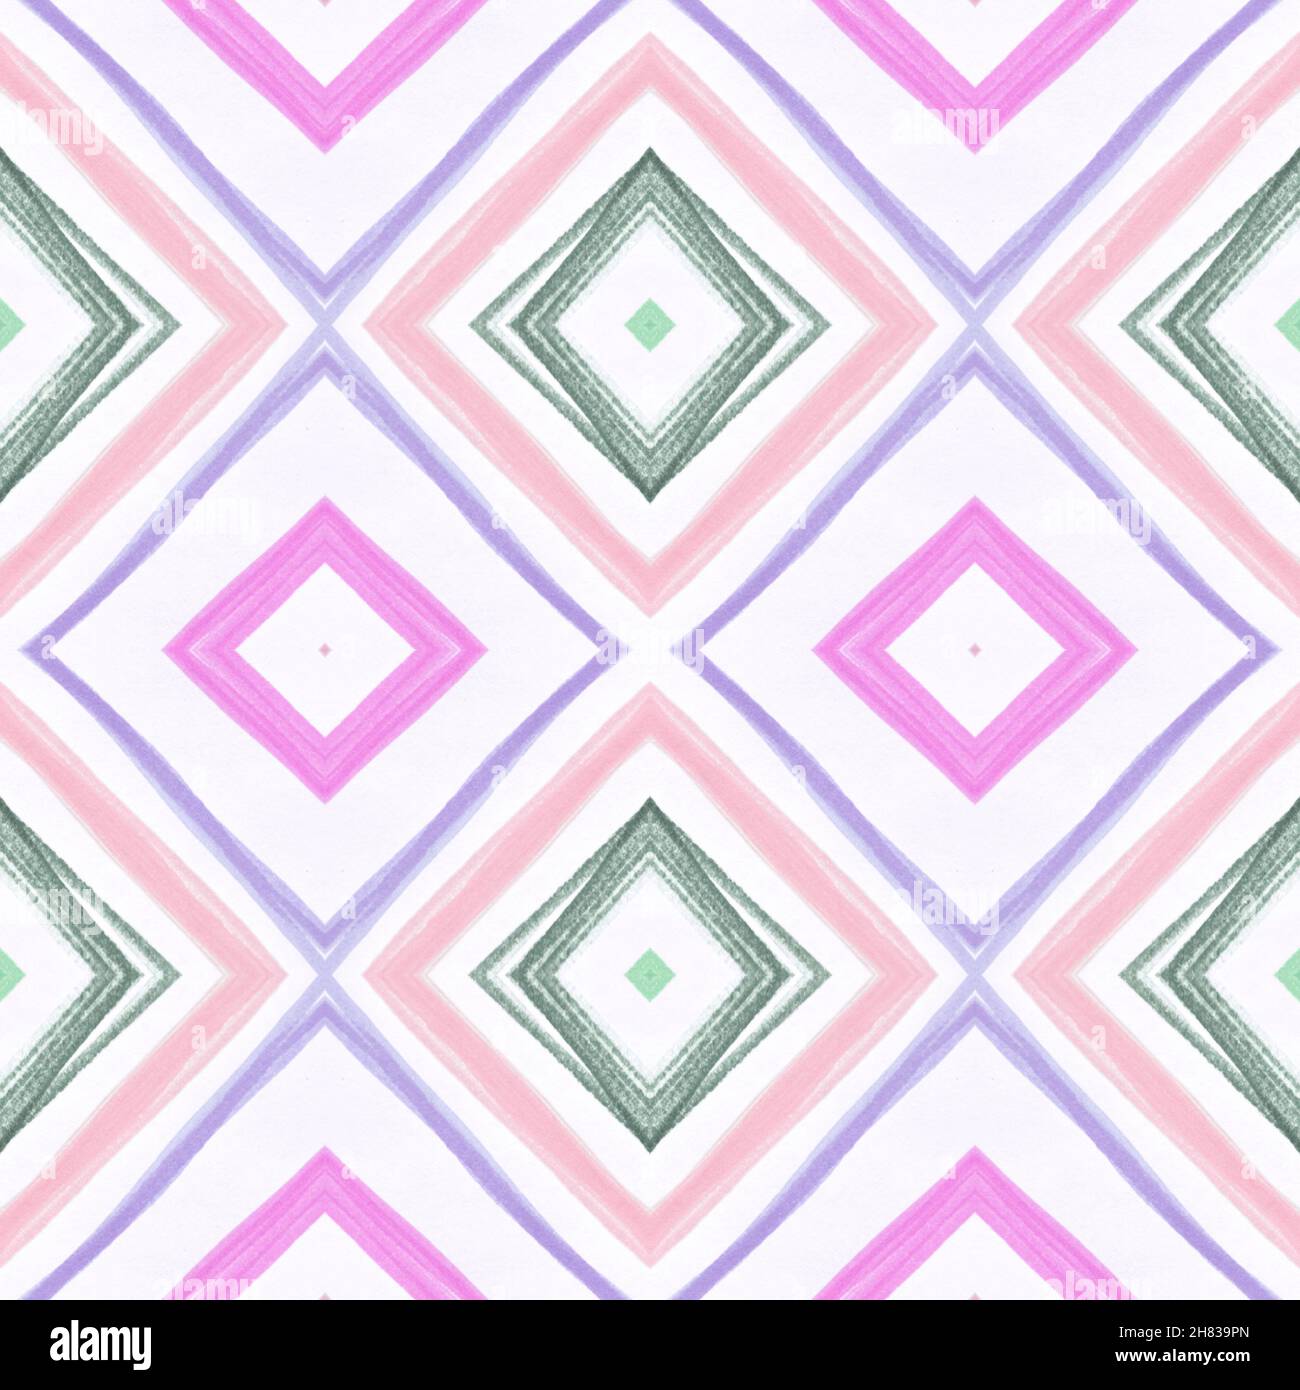 Drawn by Hand Mexican Pattern. Seamless Traditional Squares. Pink Tribal Background. Mexican Pattern. Grunge Ikat Tile. Diamond Shapes. Diamond Textur Stock Photo